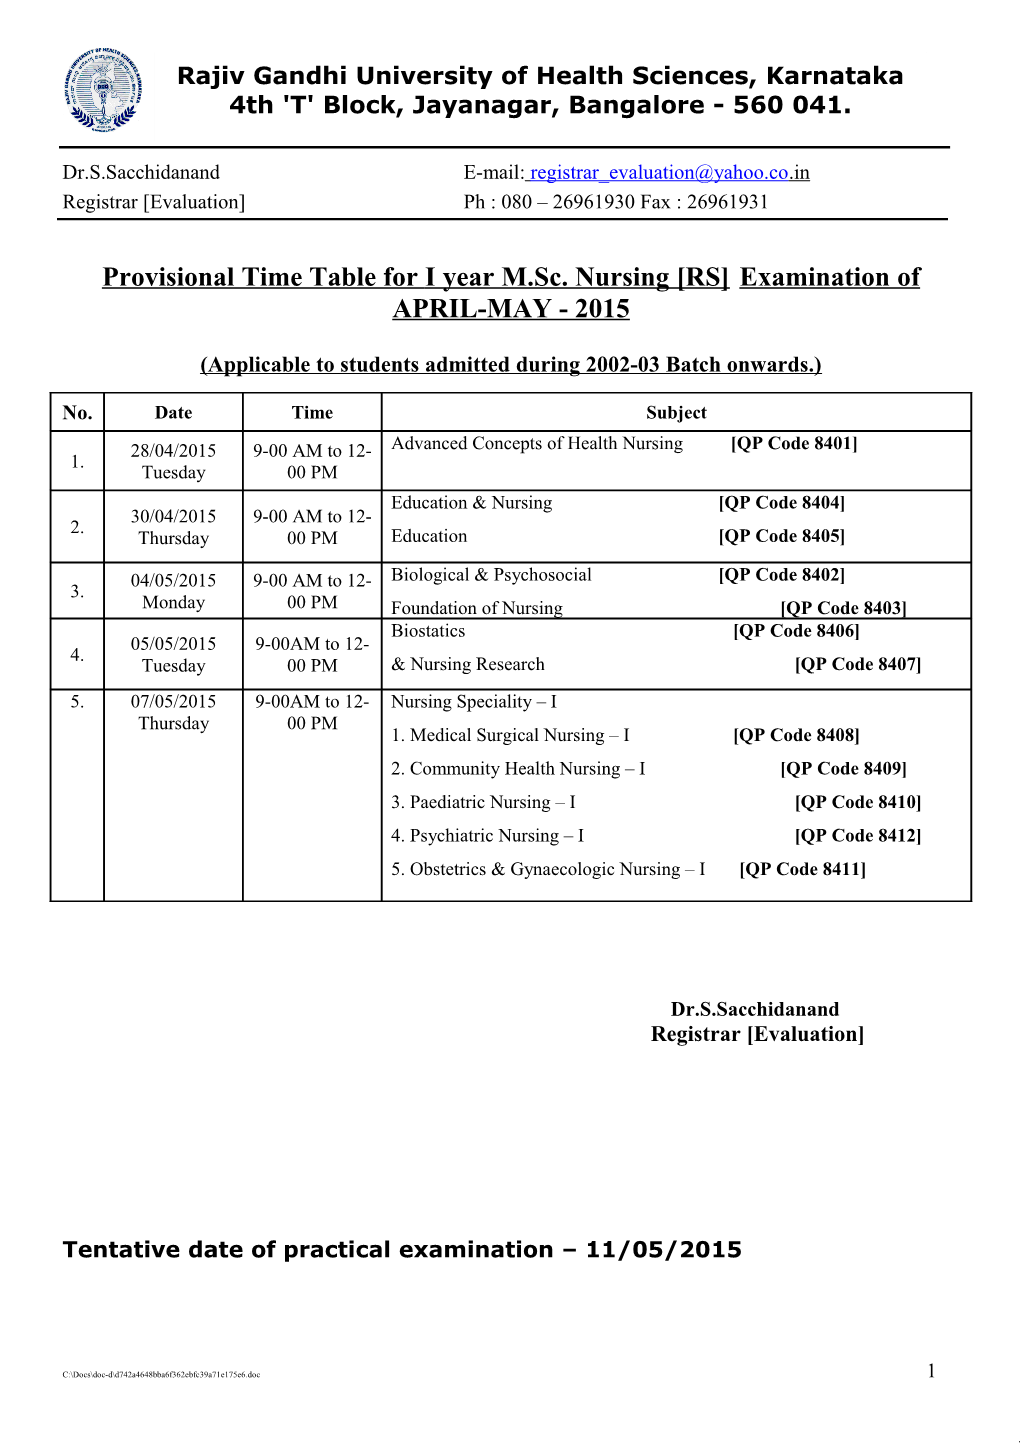 Provisional Time Table for I Year M.Sc. Nursing RS Examination of APRIL-MAY - 2015